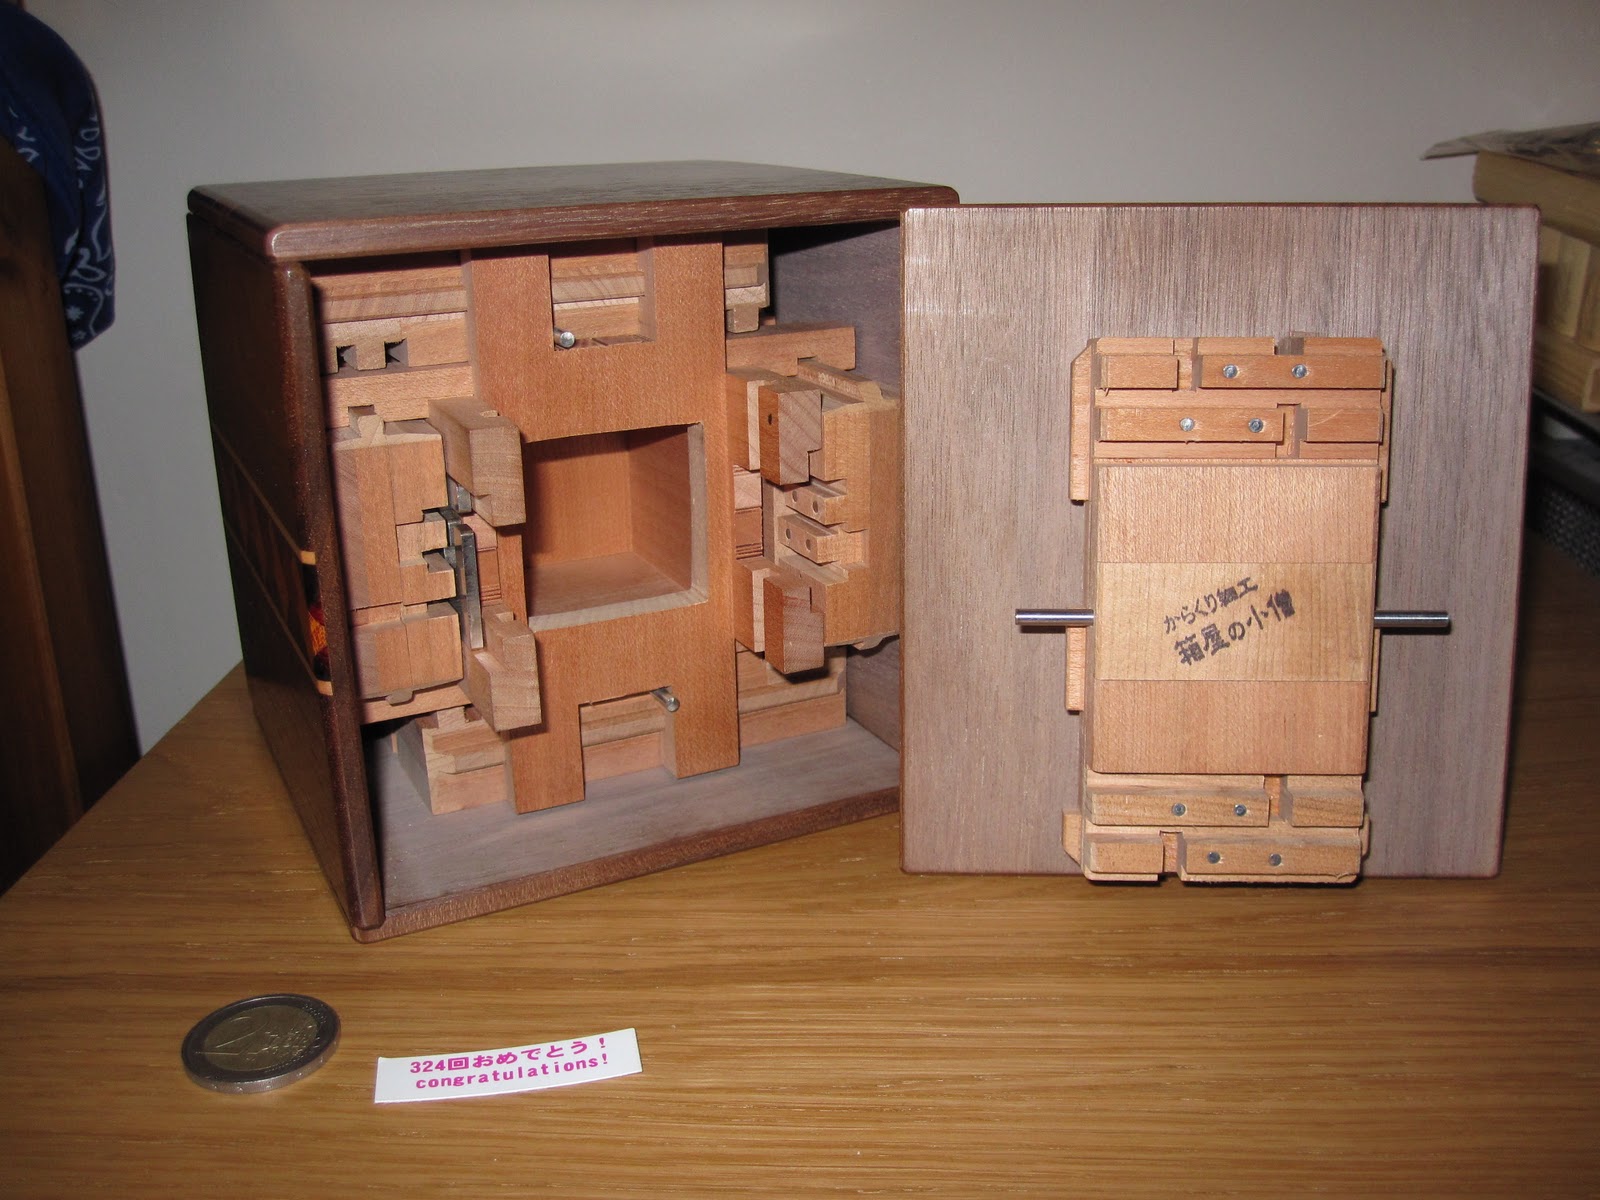 Woodworking puzzle box plans PDF Free Download